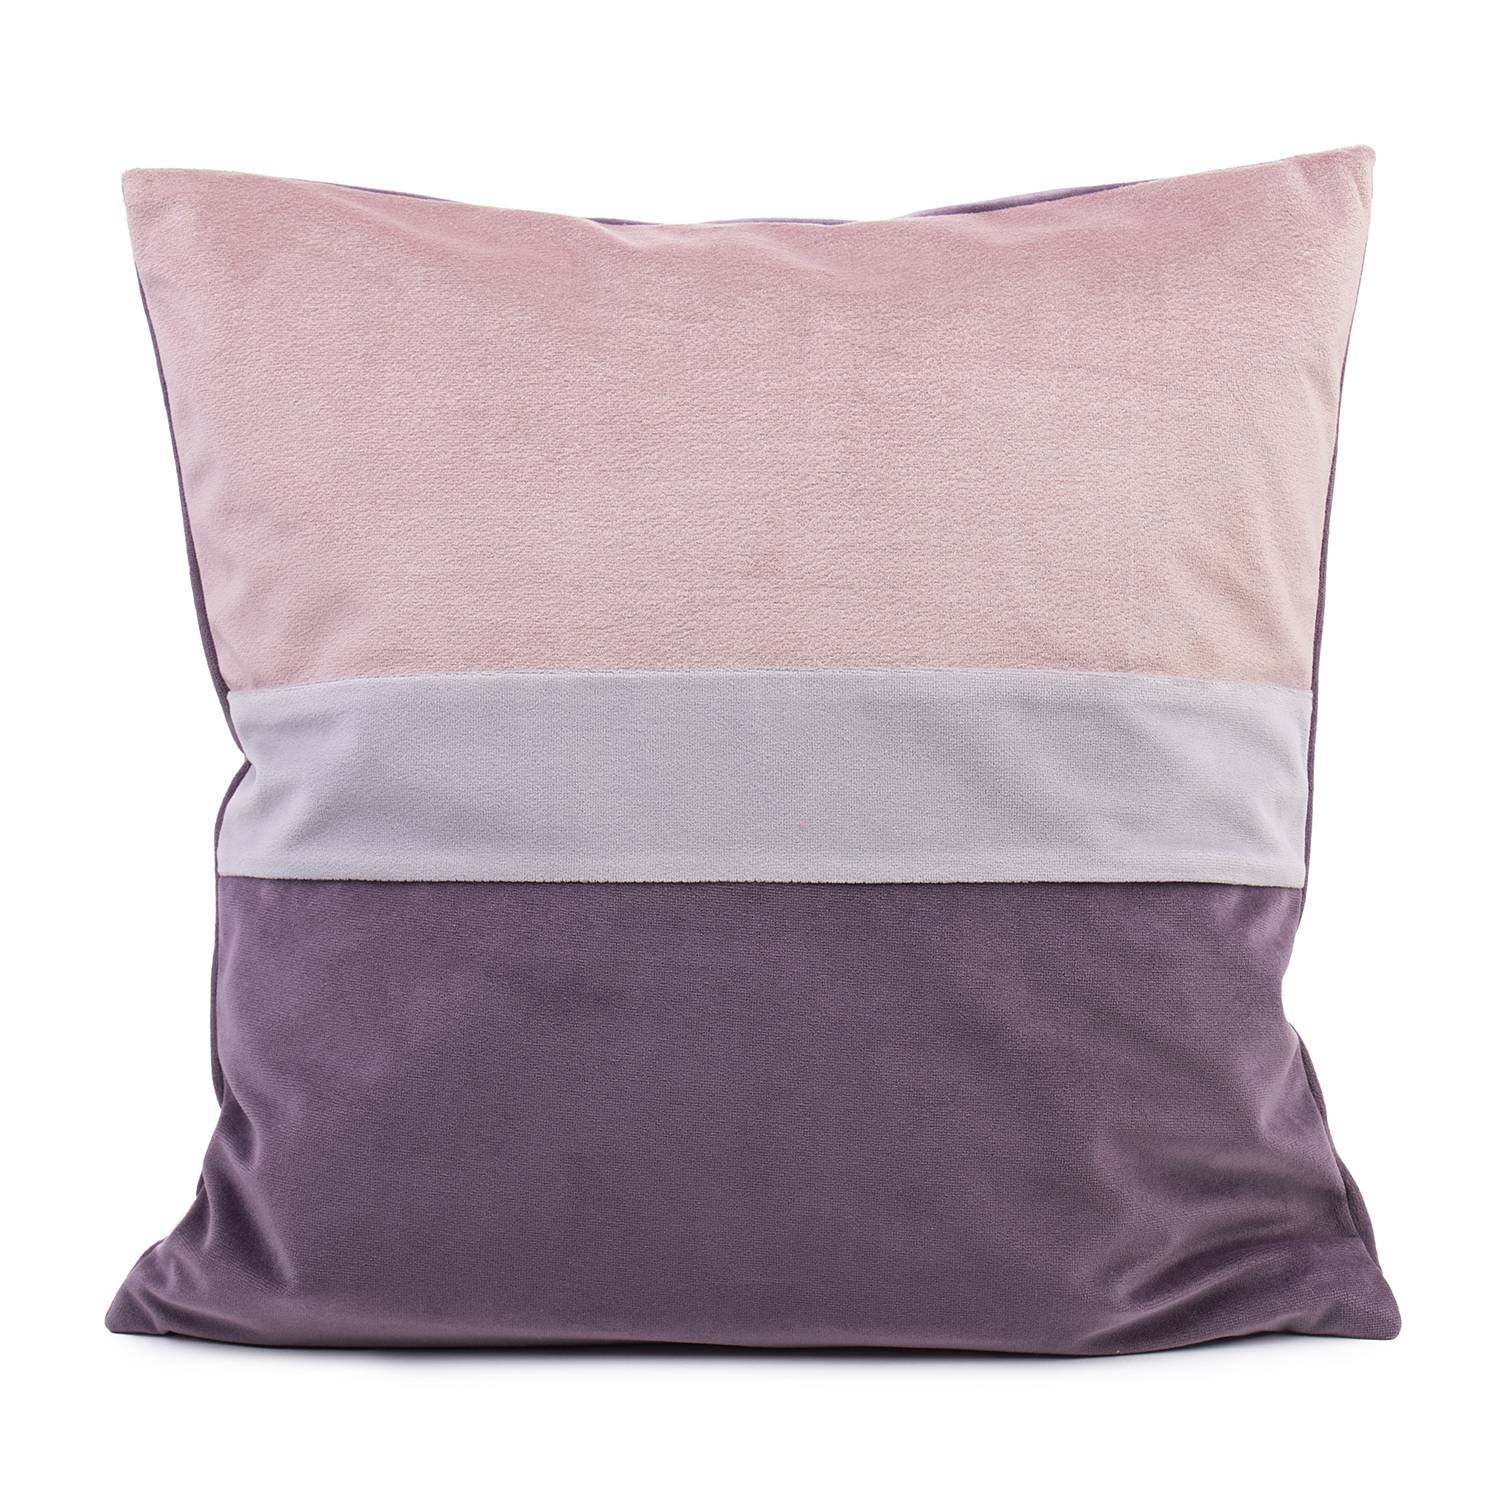 Image of Housse de coussin Pino 000000001000243535